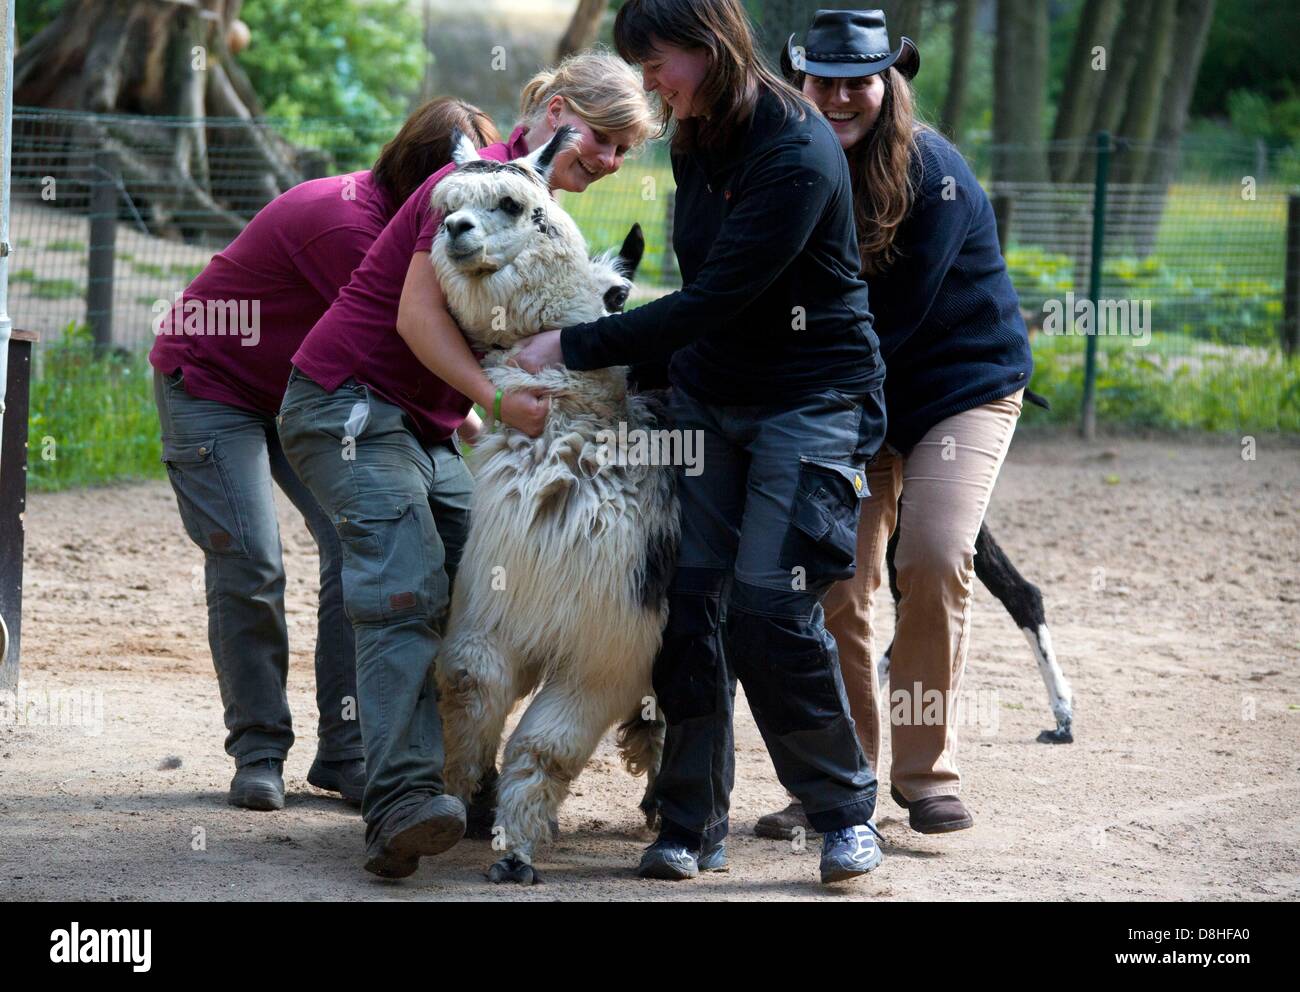 Keepers catch an alpaca to be shorn at the zoo in Schwerin, Germany, 29 May 2013. Every two years, the alpacas are shorn at the beginning of summer producing between 3 and 6 kilograms of wool per animal. Photo: JENS BUETTNER Stock Photo